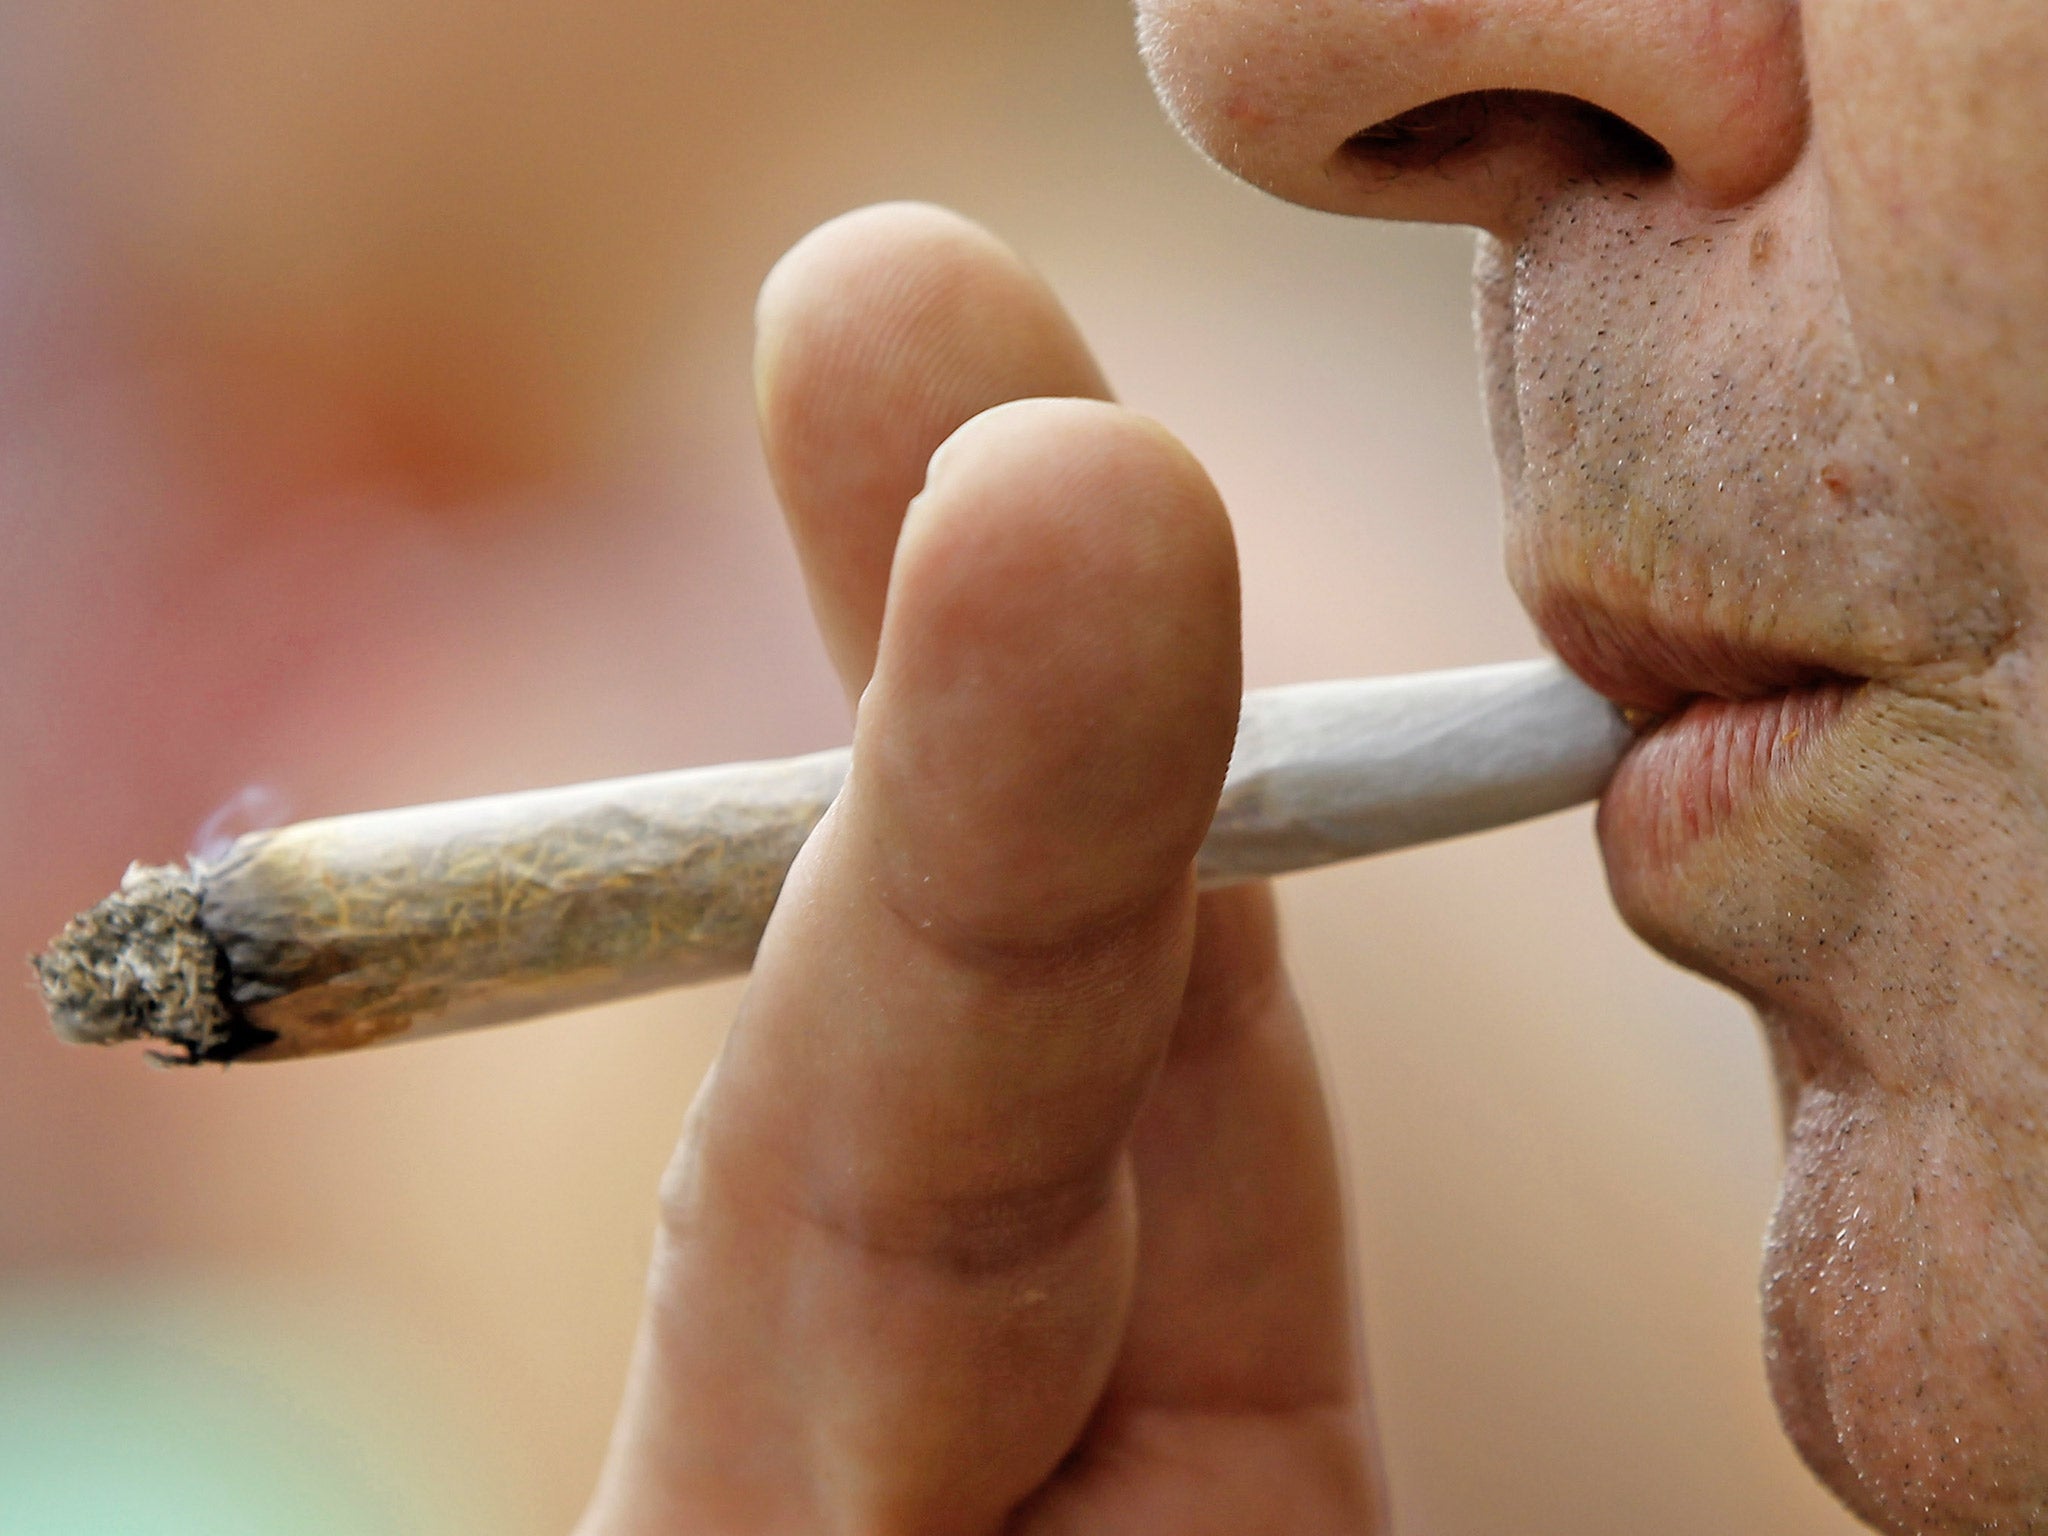 Smoking After - Porn during lunch breaks is OK but smoking cannabis can get you sacked,  Italy's highest court rules | The Independent | The Independent